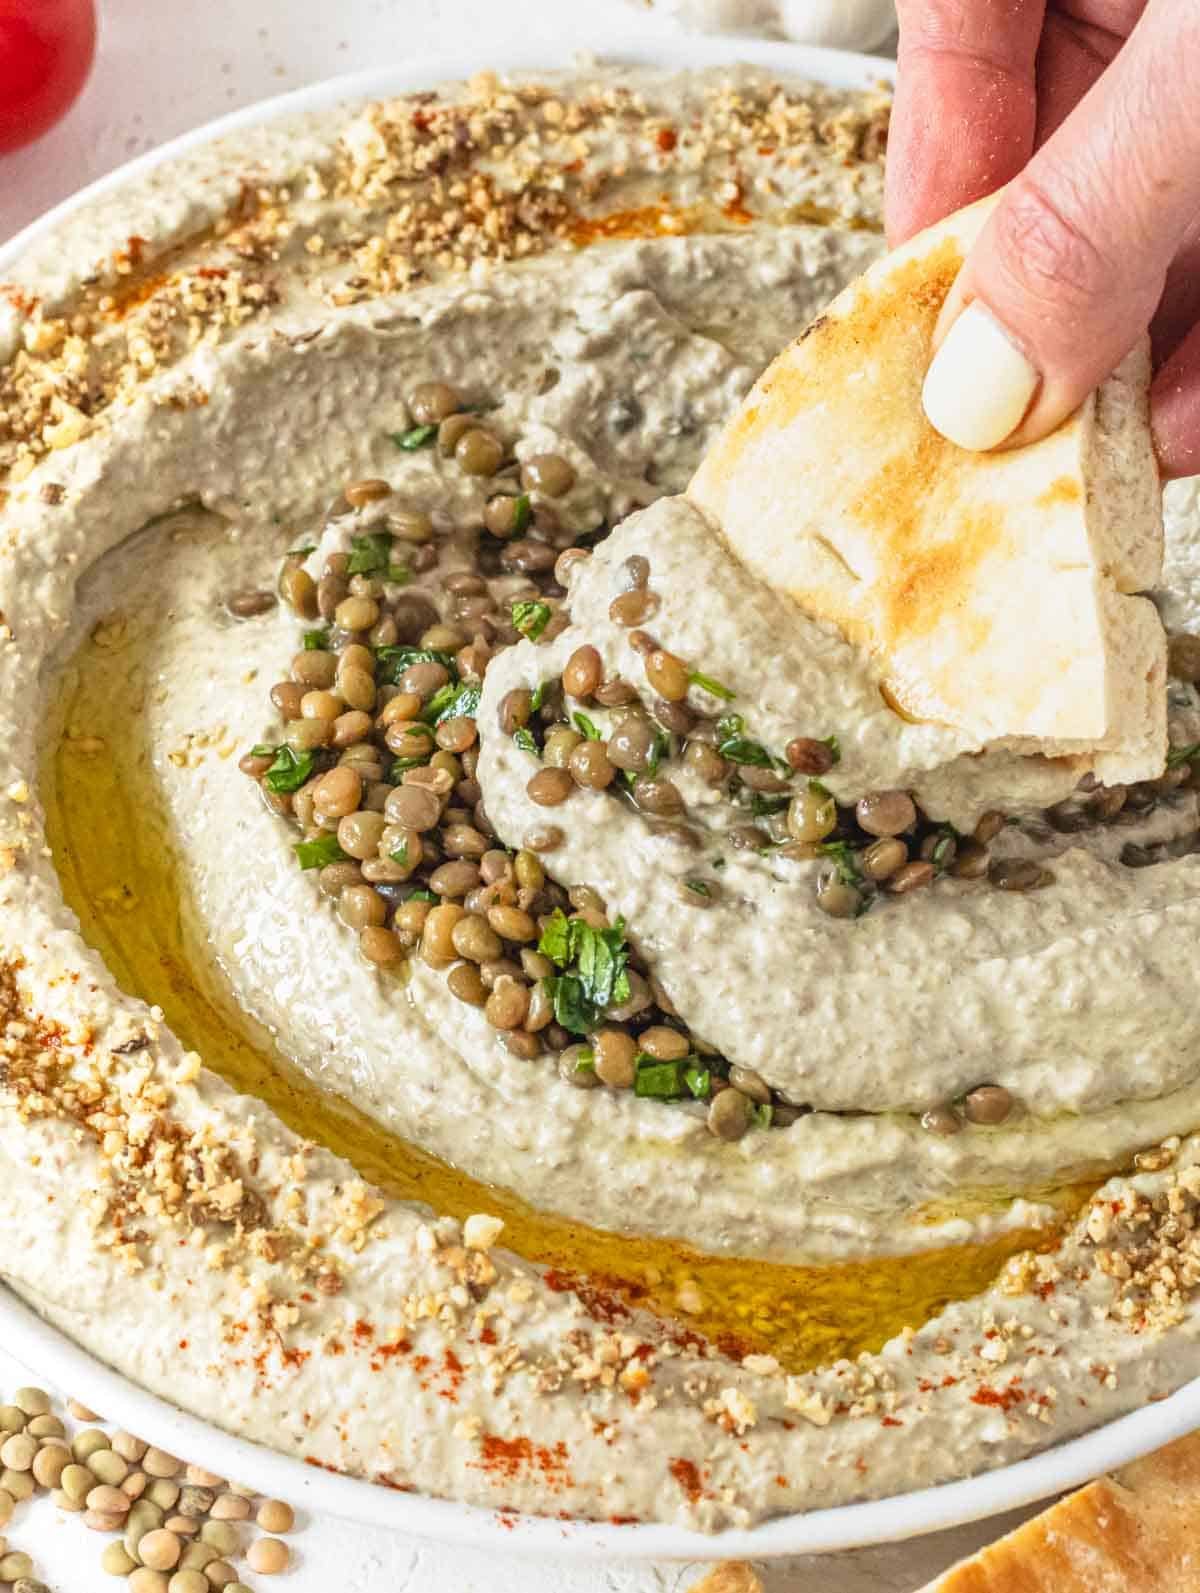 Lentil hummus with hand holding a piece of pita